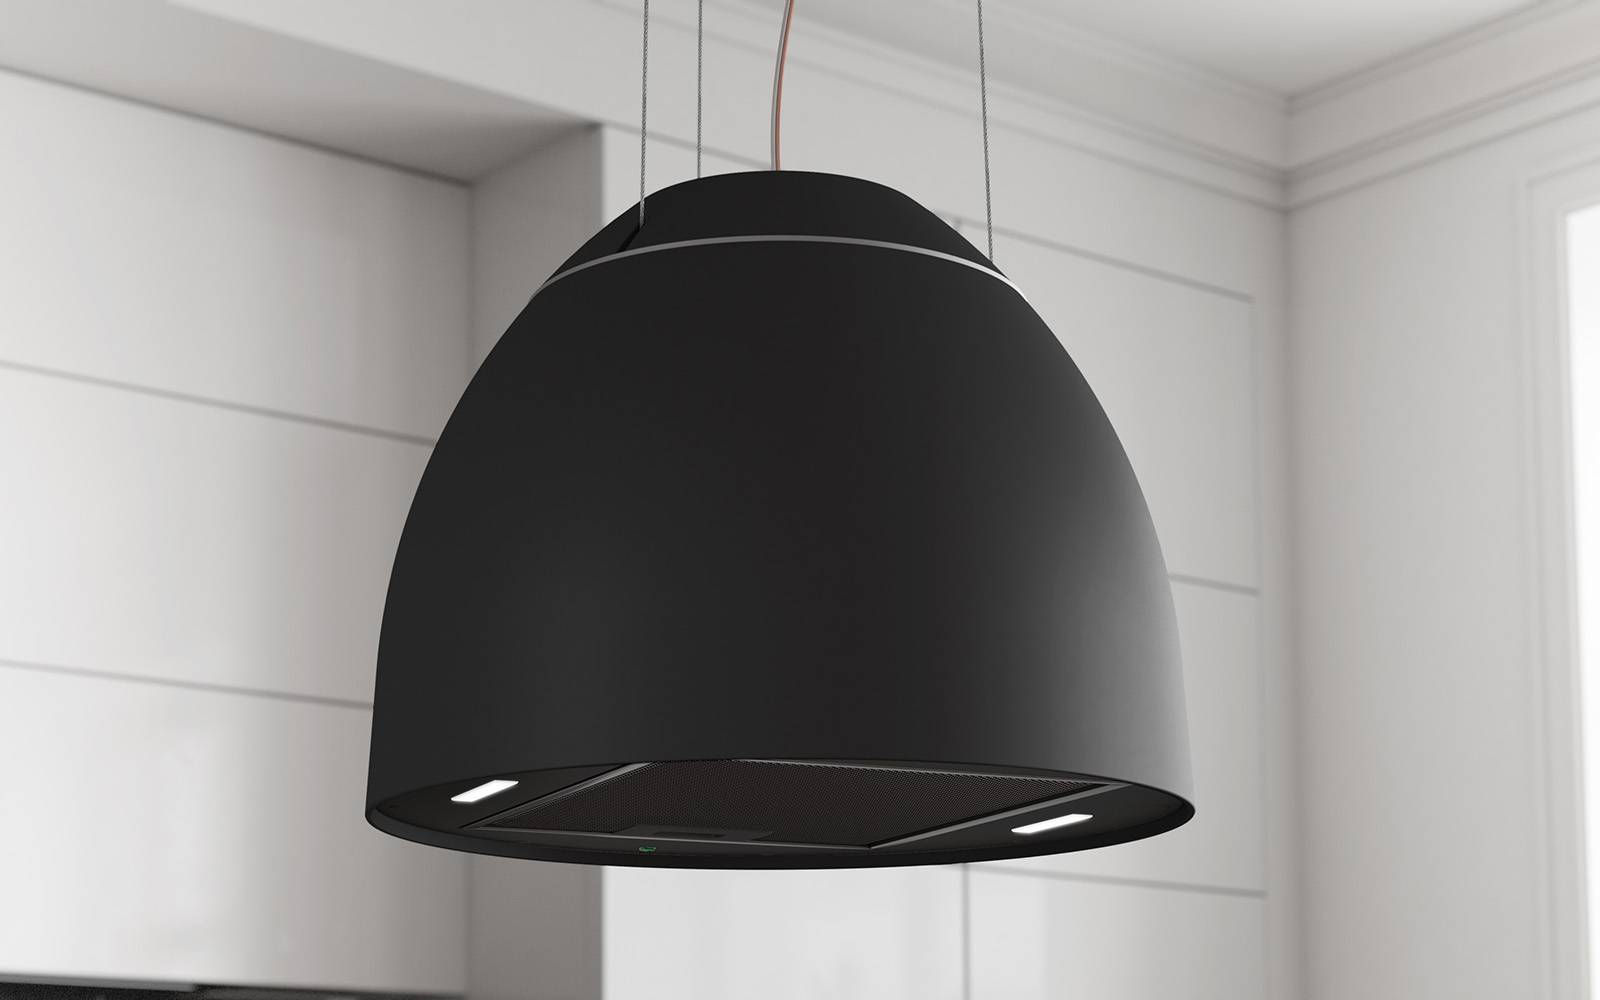 Airforce New Moon 45cm Island Cooker Hood in Complete Black Satin Finish with Slim LED Lights